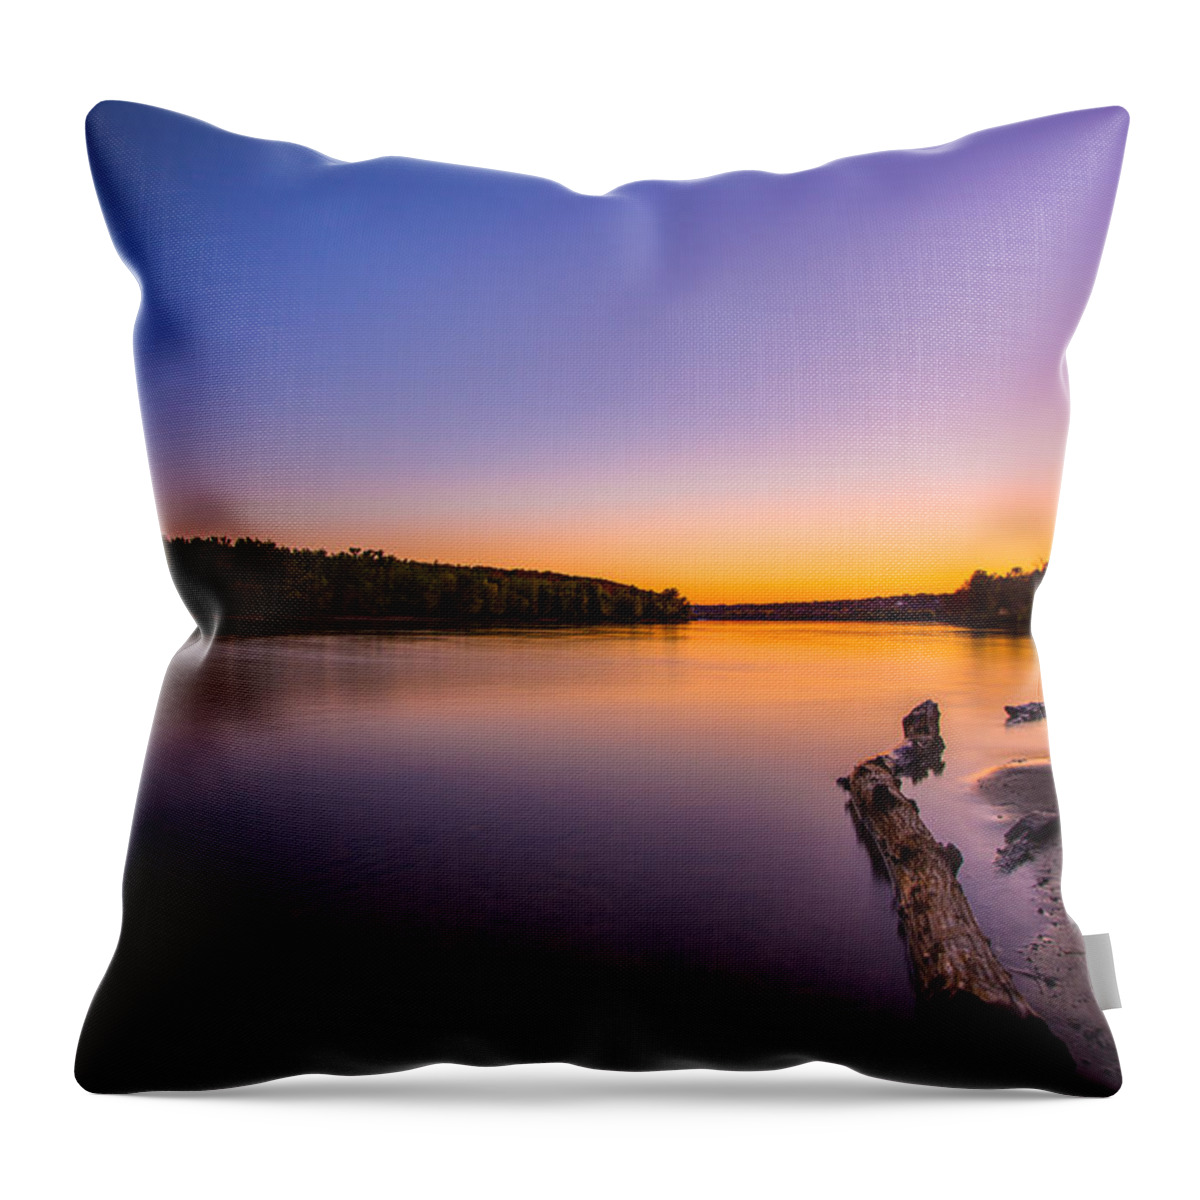 Stillwater Throw Pillow featuring the photograph Tranquility by Adam Mateo Fierro